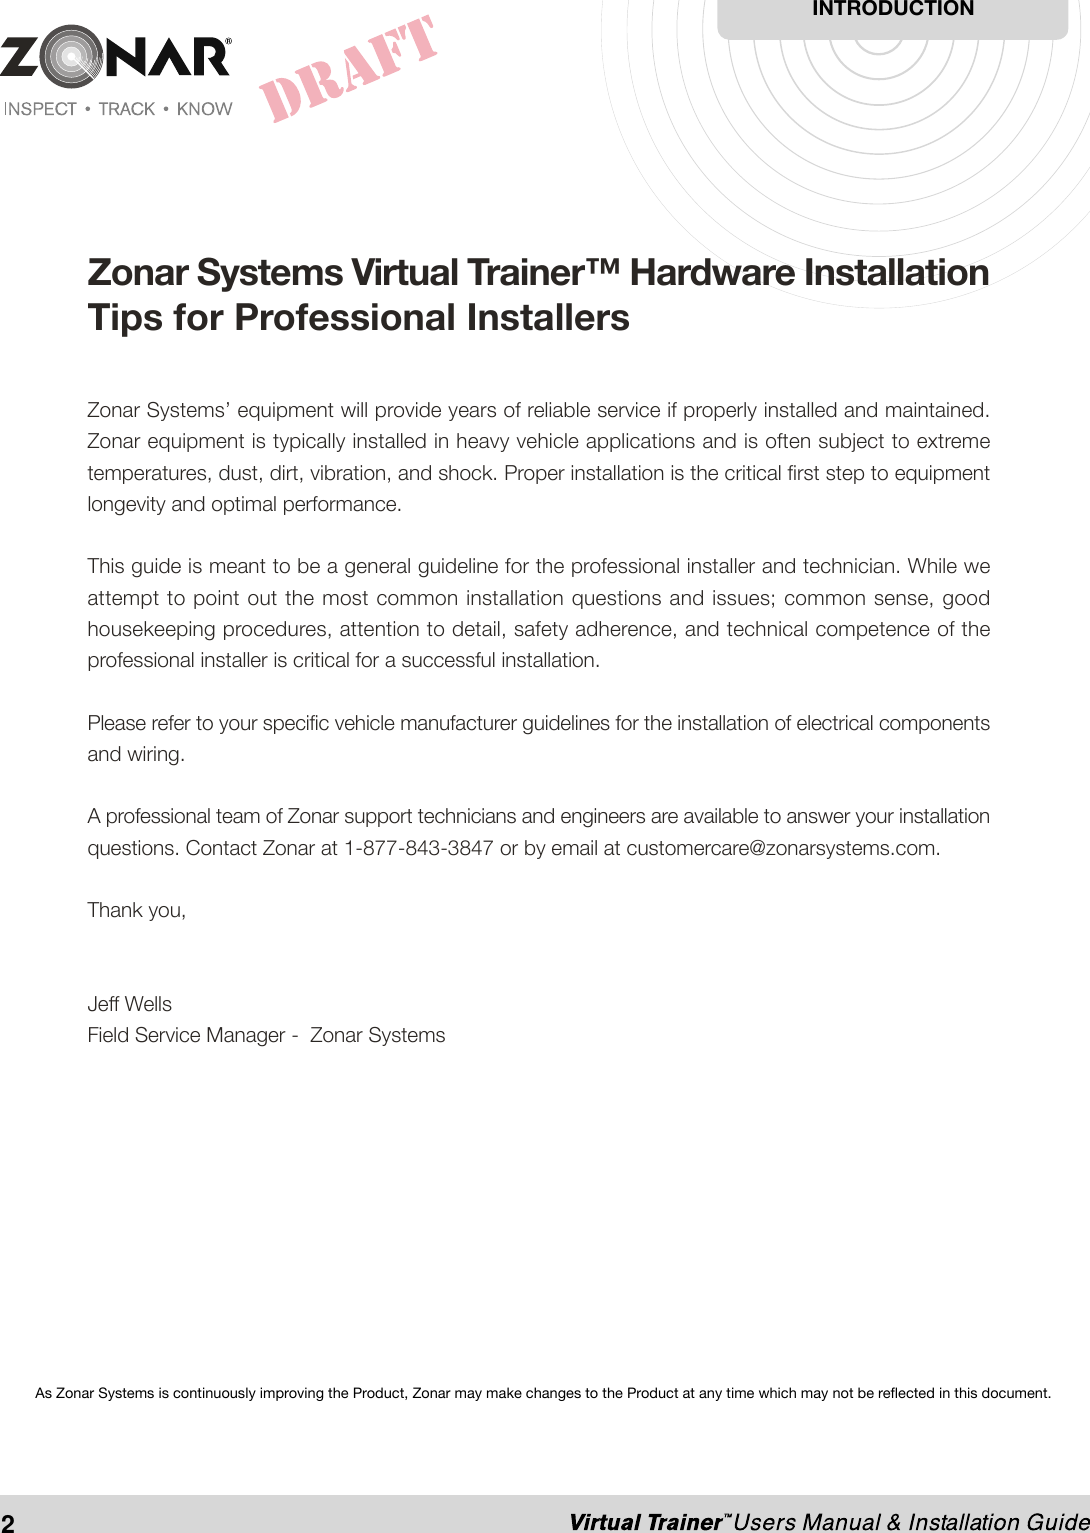 As Zonar Systems is continuously improving the Product, Zonar may make changes to the Product at any time which may not be reflected in this document.INTRODUCTION2Zonar Systems Virtual Trainer™ Hardware InstallationTips for Professional InstallersZonar Systems’ equipment will provide years of reliable service if properly installed and maintained.Zonar equipment is typically installed in heavy vehicle applications and is often subject to extremetemperatures, dust, dirt, vibration, and shock. Proper installation is the critical first step to equipmentlongevity and optimal performance.This guide is meant to be a general guideline for the professional installer and technician. While weattempt to point out the most common installation questions and issues; common sense, goodhousekeeping procedures, attention to detail, safety adherence, and technical competence of theprofessional installer is critical for a successful installation.Please refer to your specific vehicle manufacturer guidelines for the installation of electrical componentsand wiring.A professional team of Zonar support technicians and engineers are available to answer your installationquestions. Contact Zonar at 1-877-843-3847 or by email at customercare@zonarsystems.com.Thank you,Jeff WellsField Service Manager -  Zonar Systems